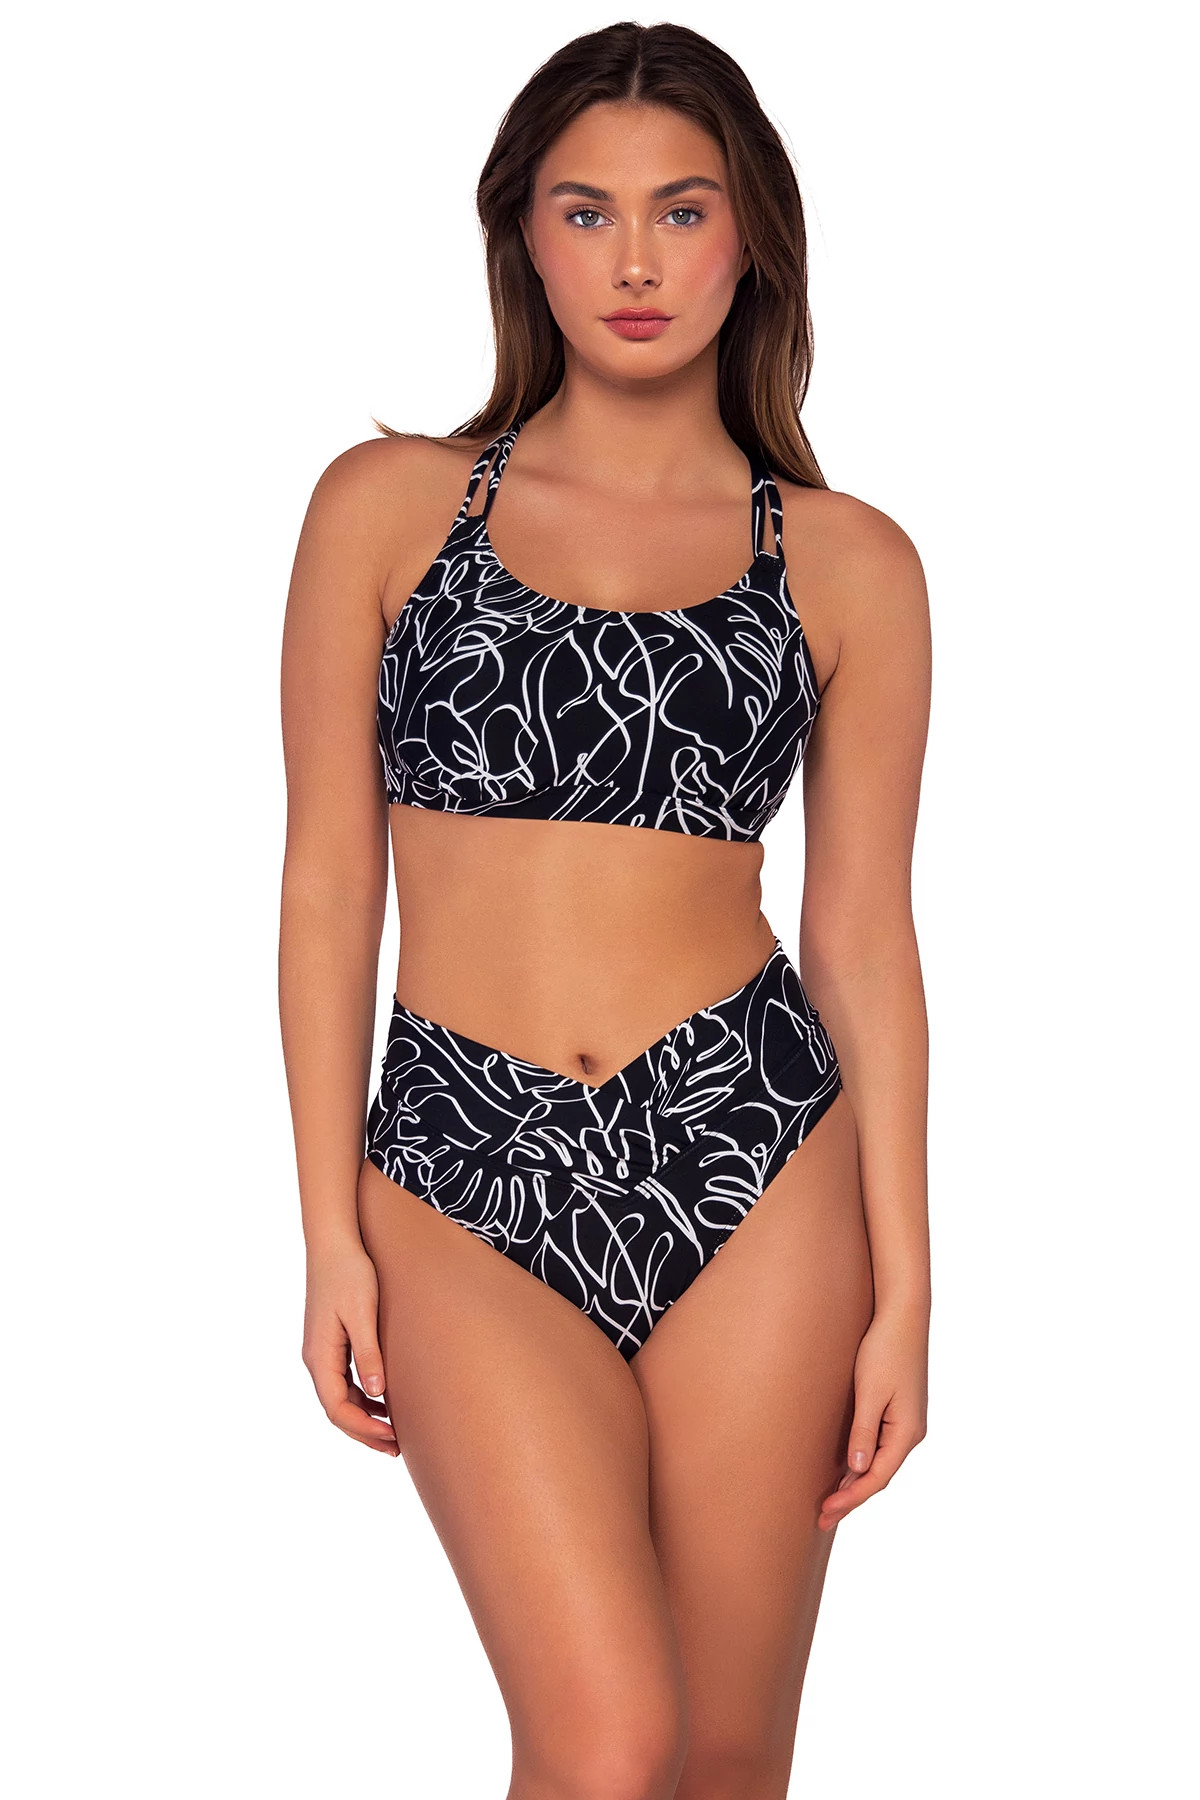 LOST PALMS Taylor Bralette Bikini Top (E-H Cup) image number 1